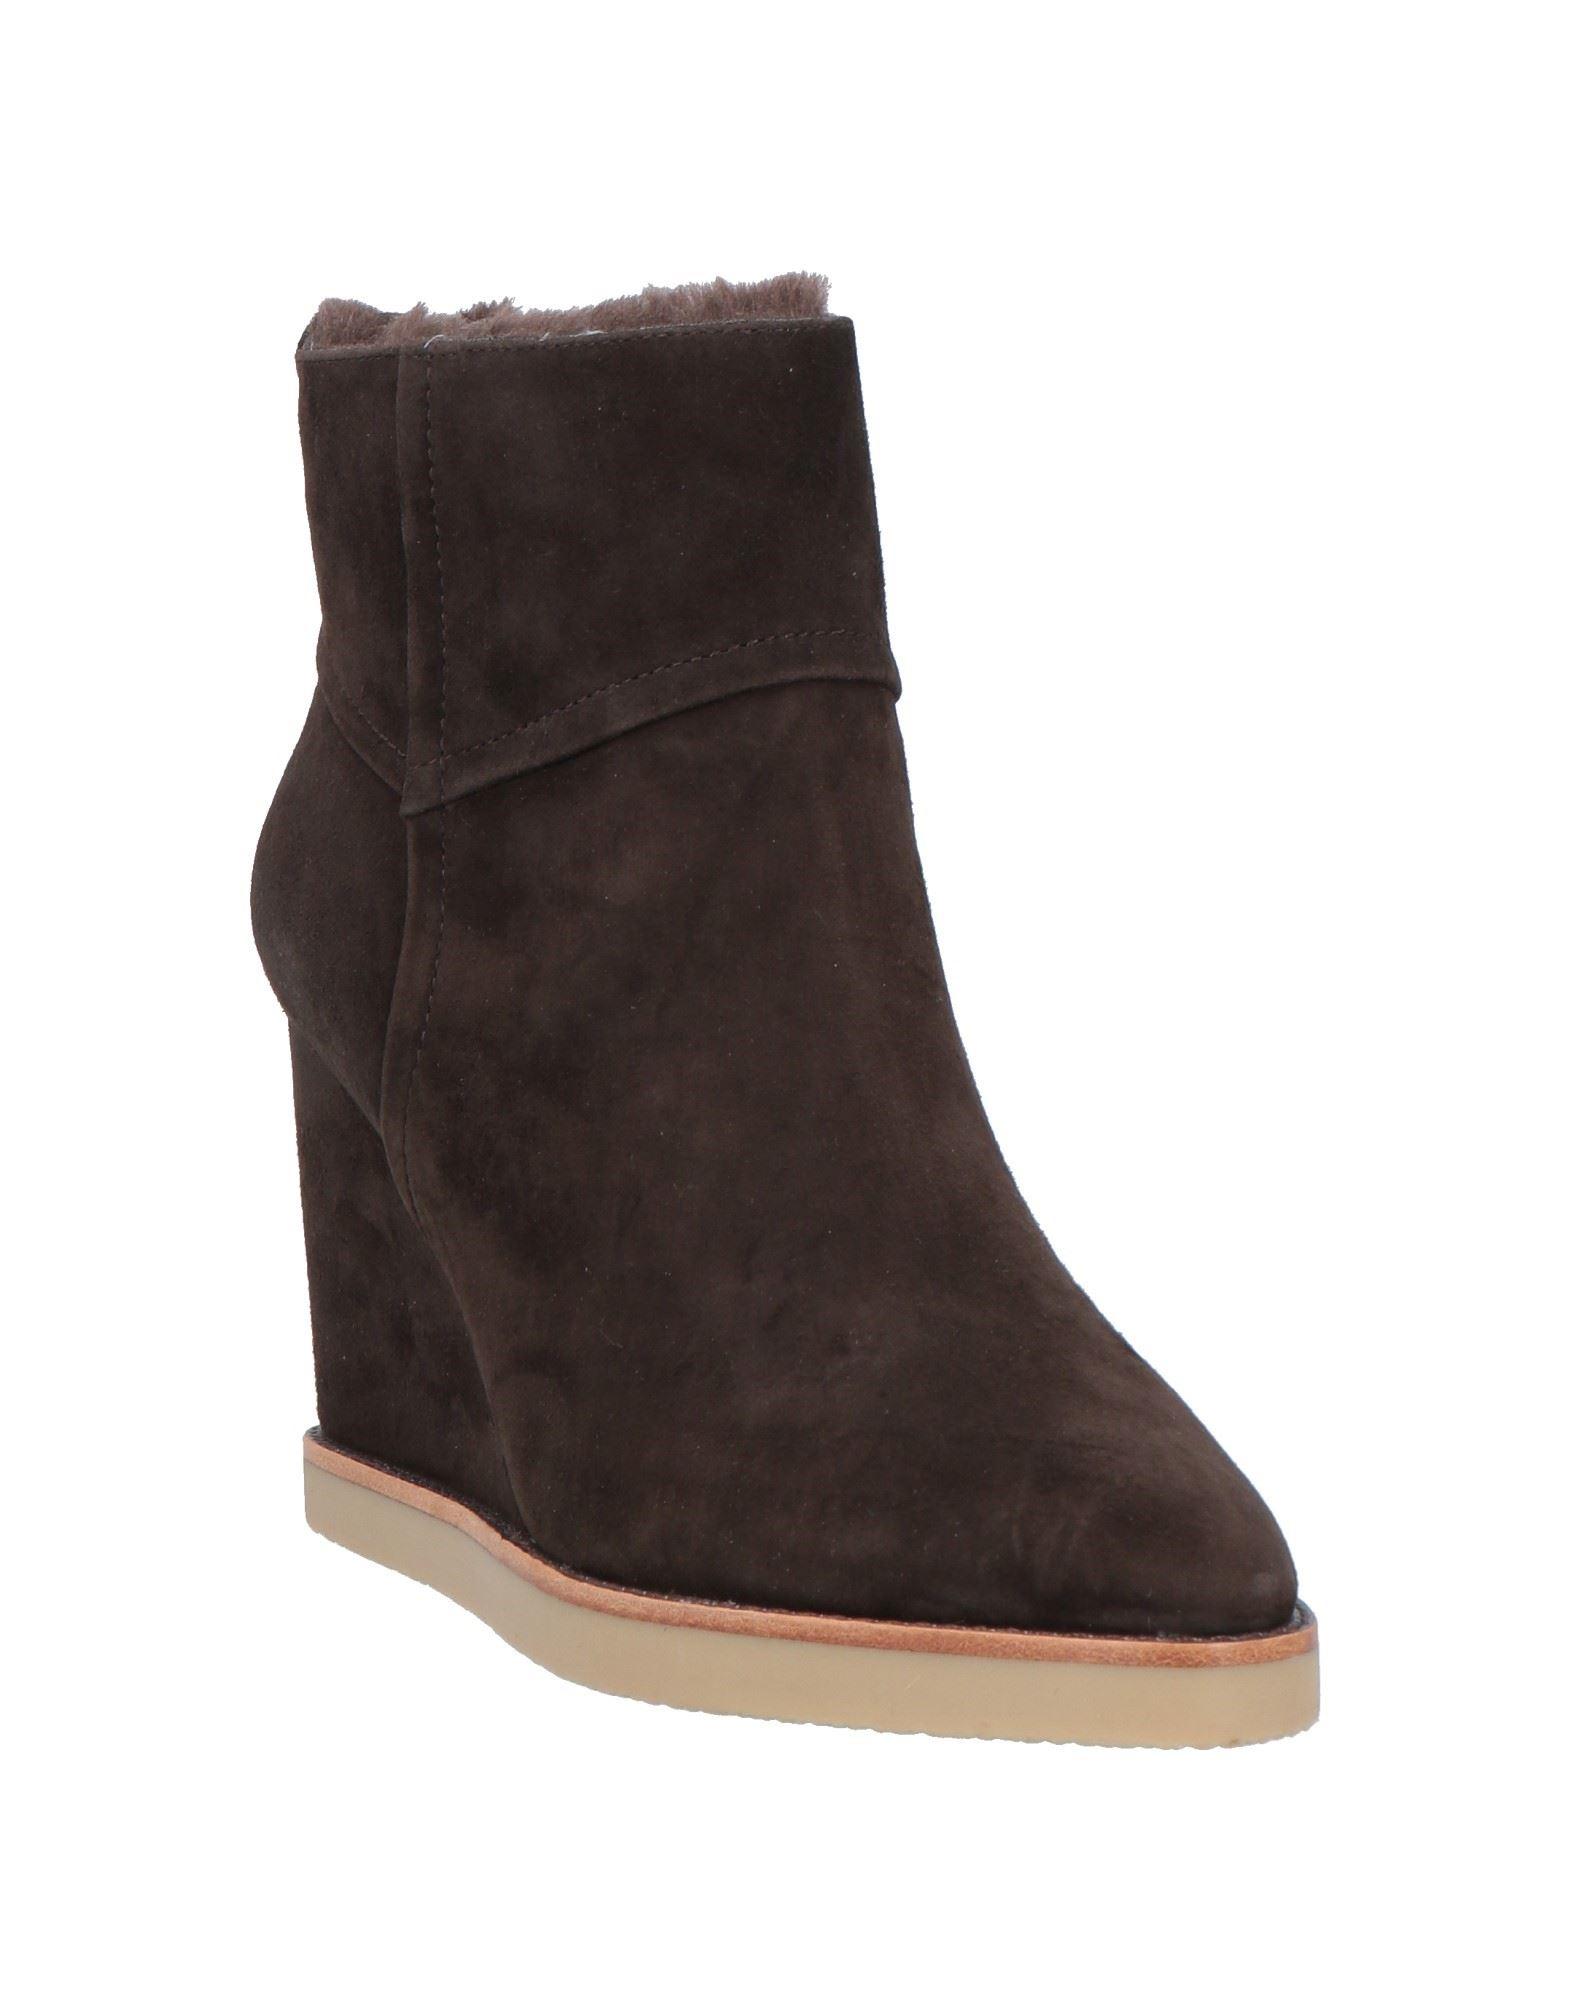 Lola Cruz Ankle Boots in Brown | Lyst